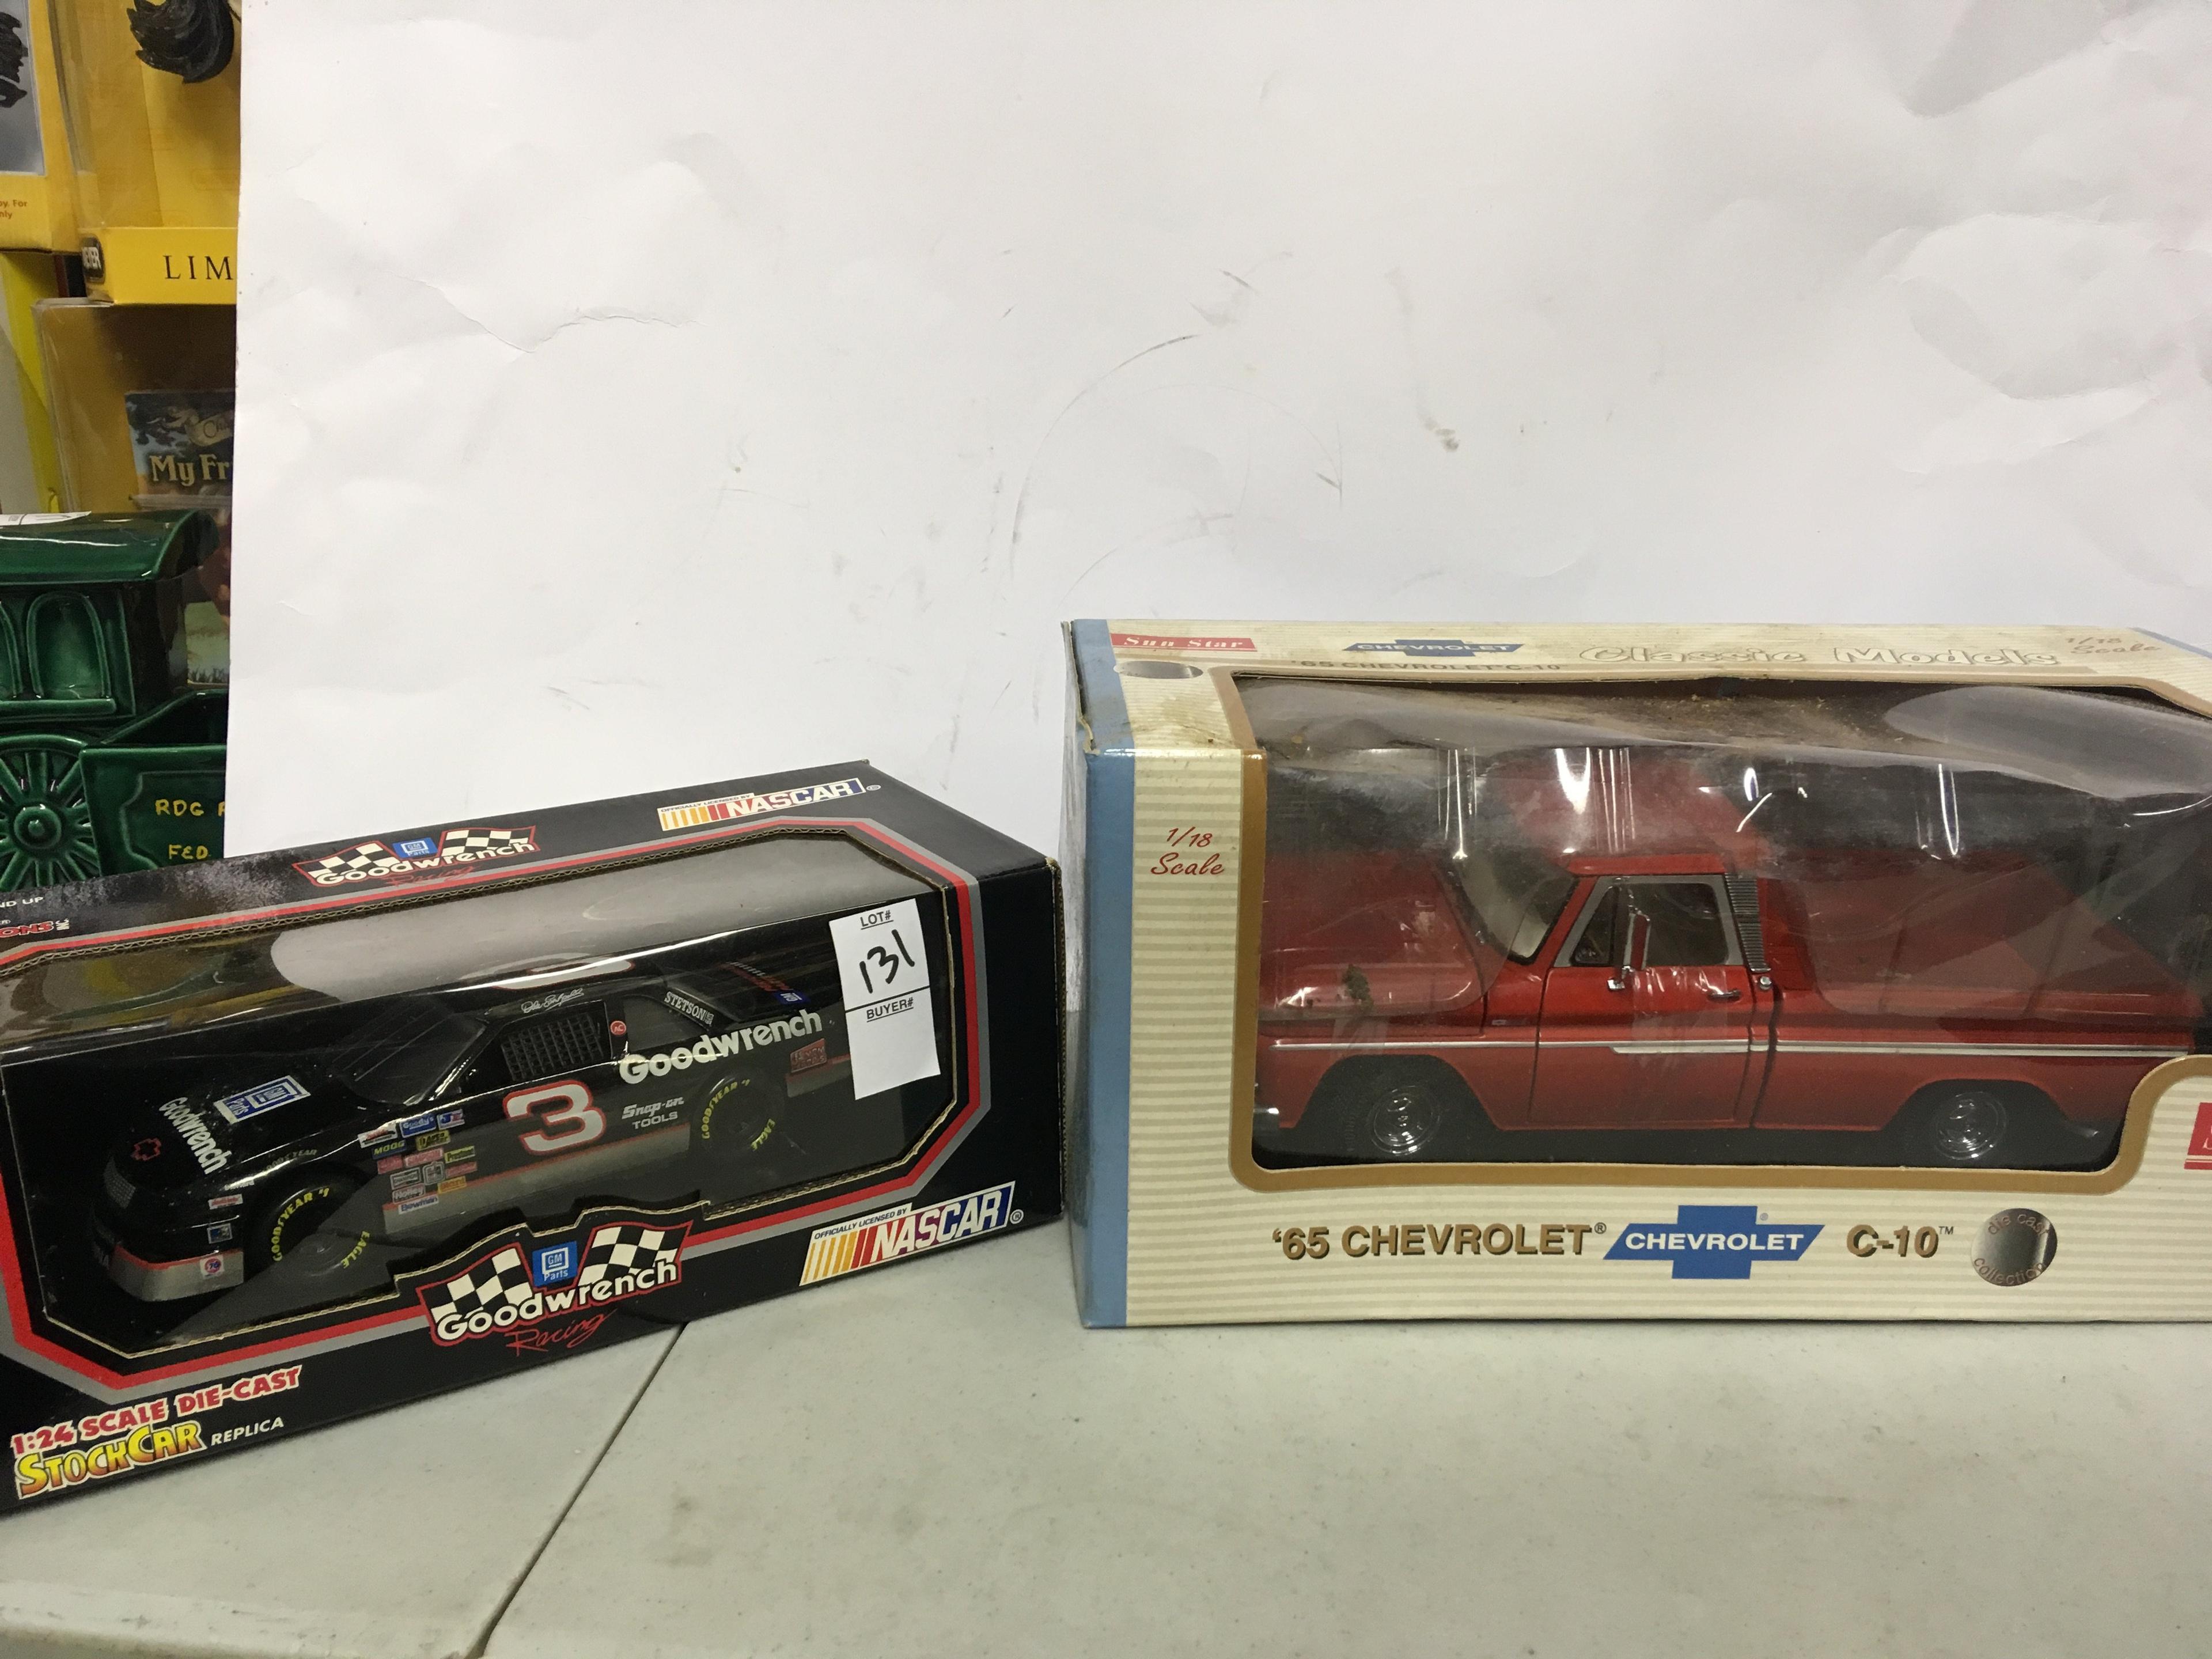 New in box Earnhardt stock car and new in box 1965 Chevrolet C 10 toy truck